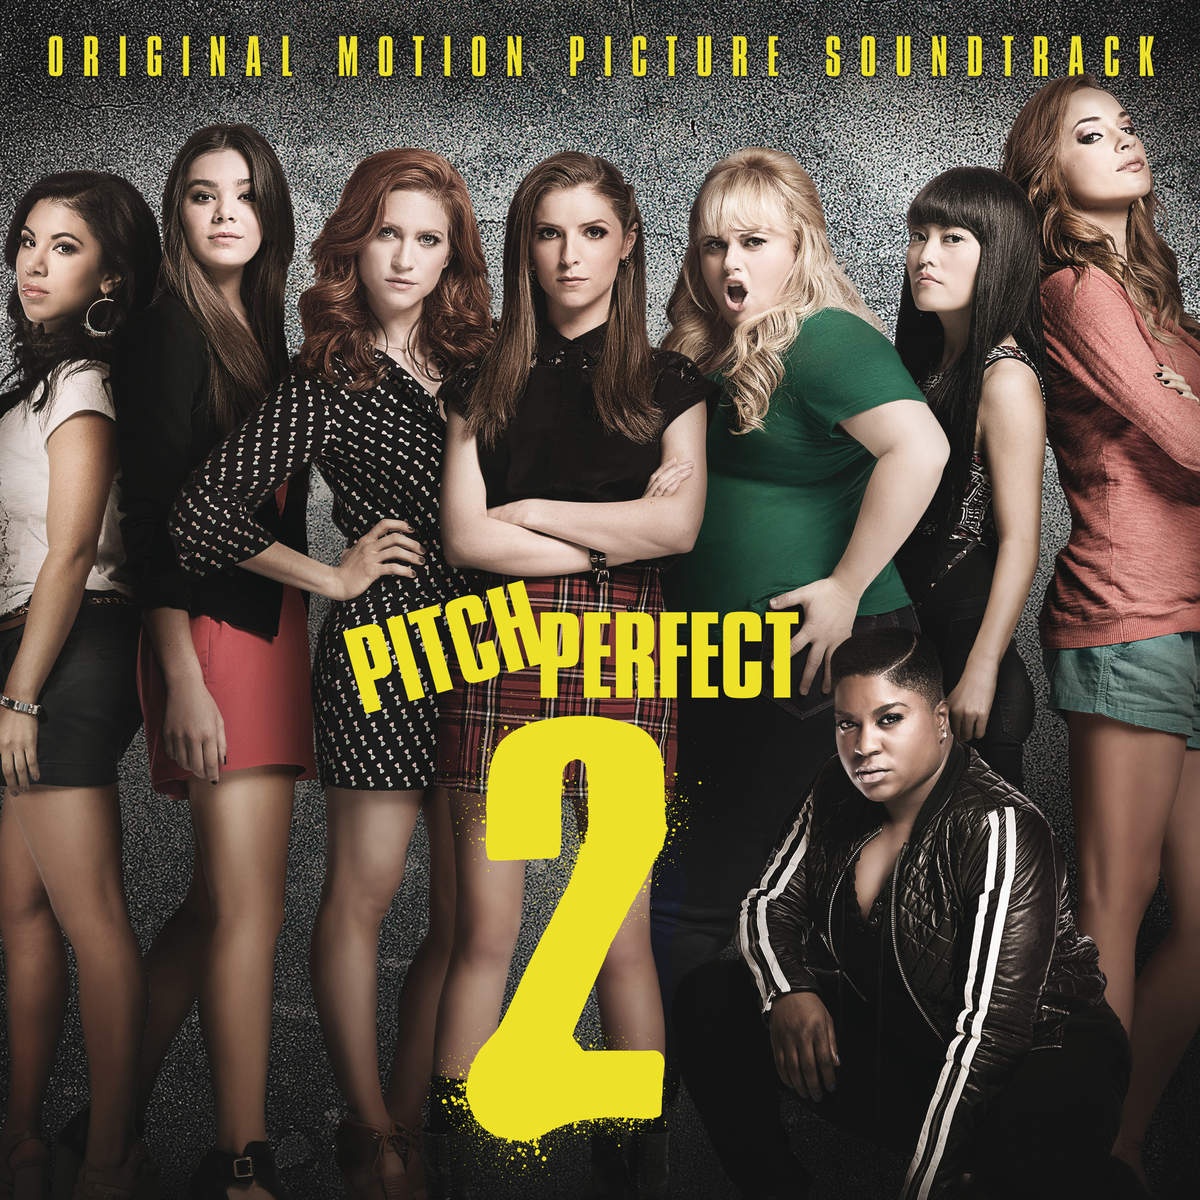 Kennedy Center Performance - From "Pitch Perfect 2" Soundtrack